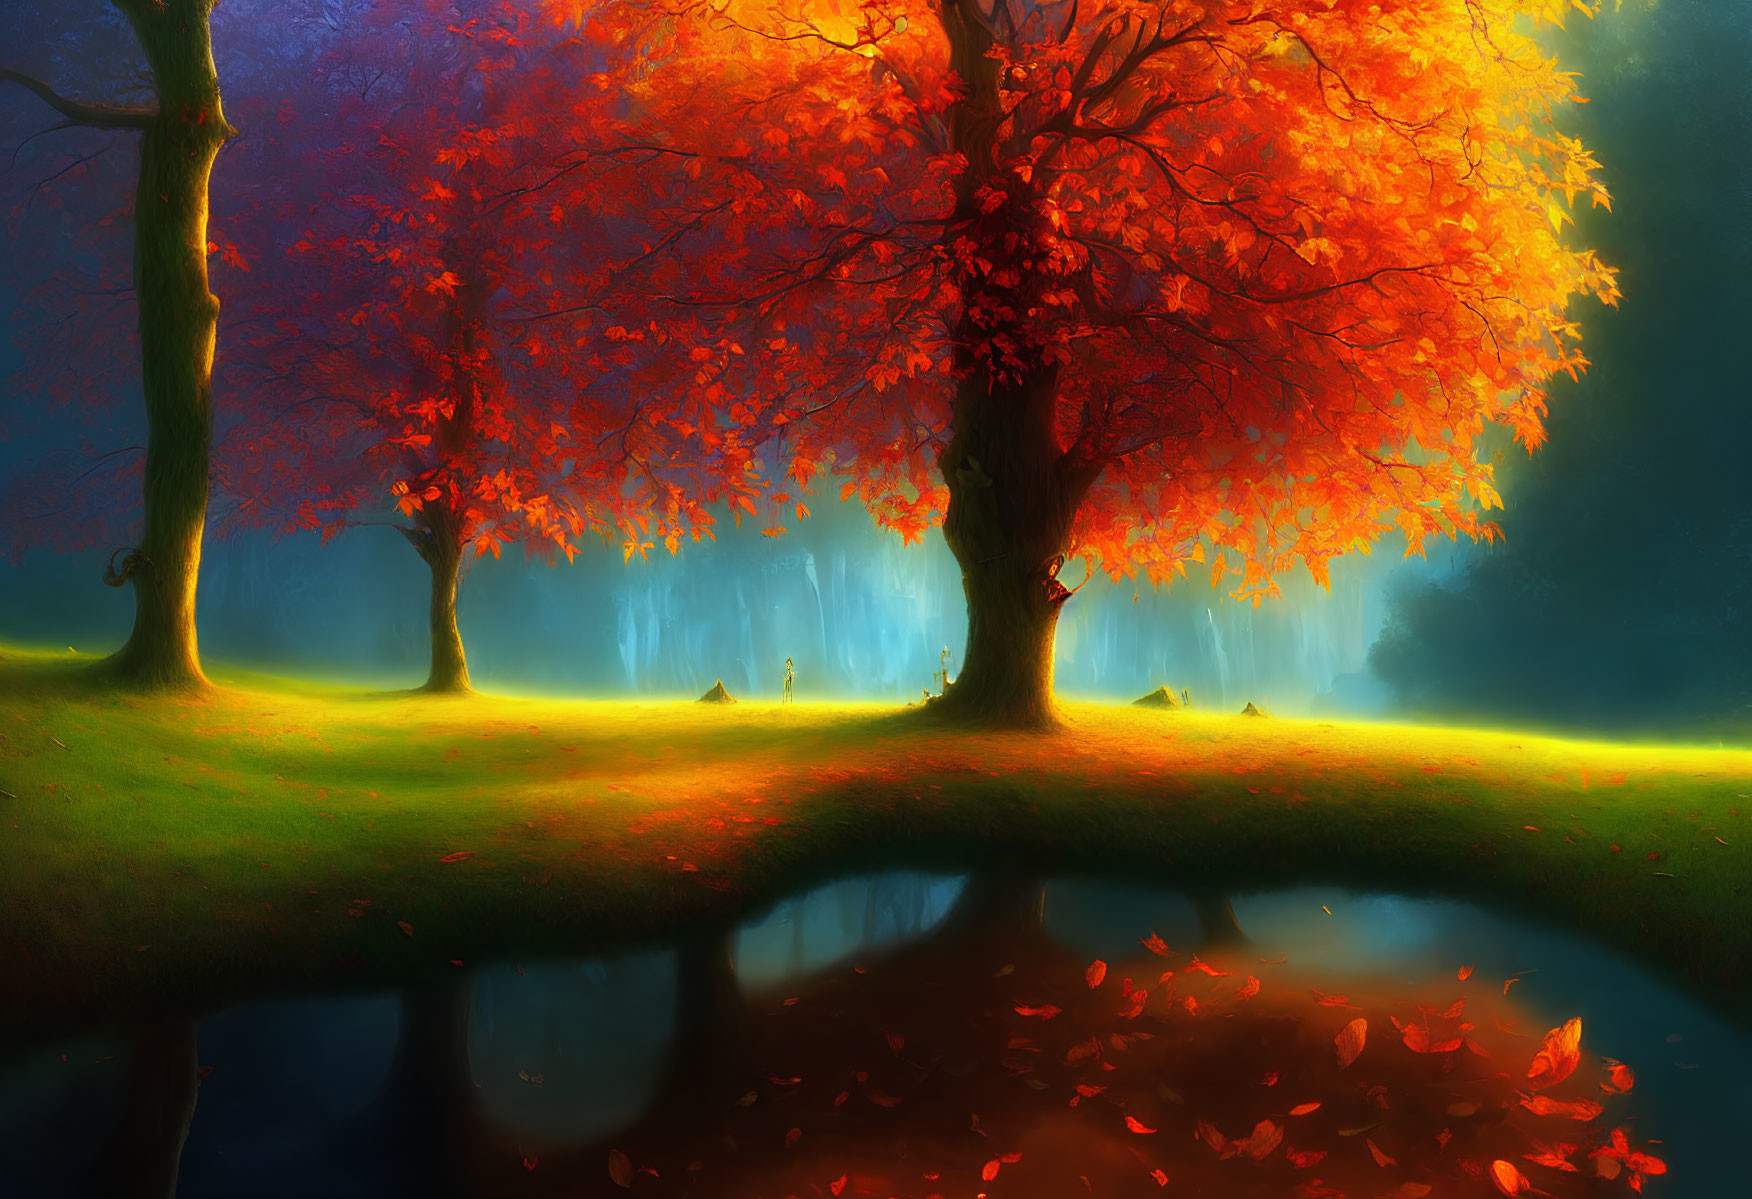 Colorful autumn trees and pond reflection in serene forest setting.